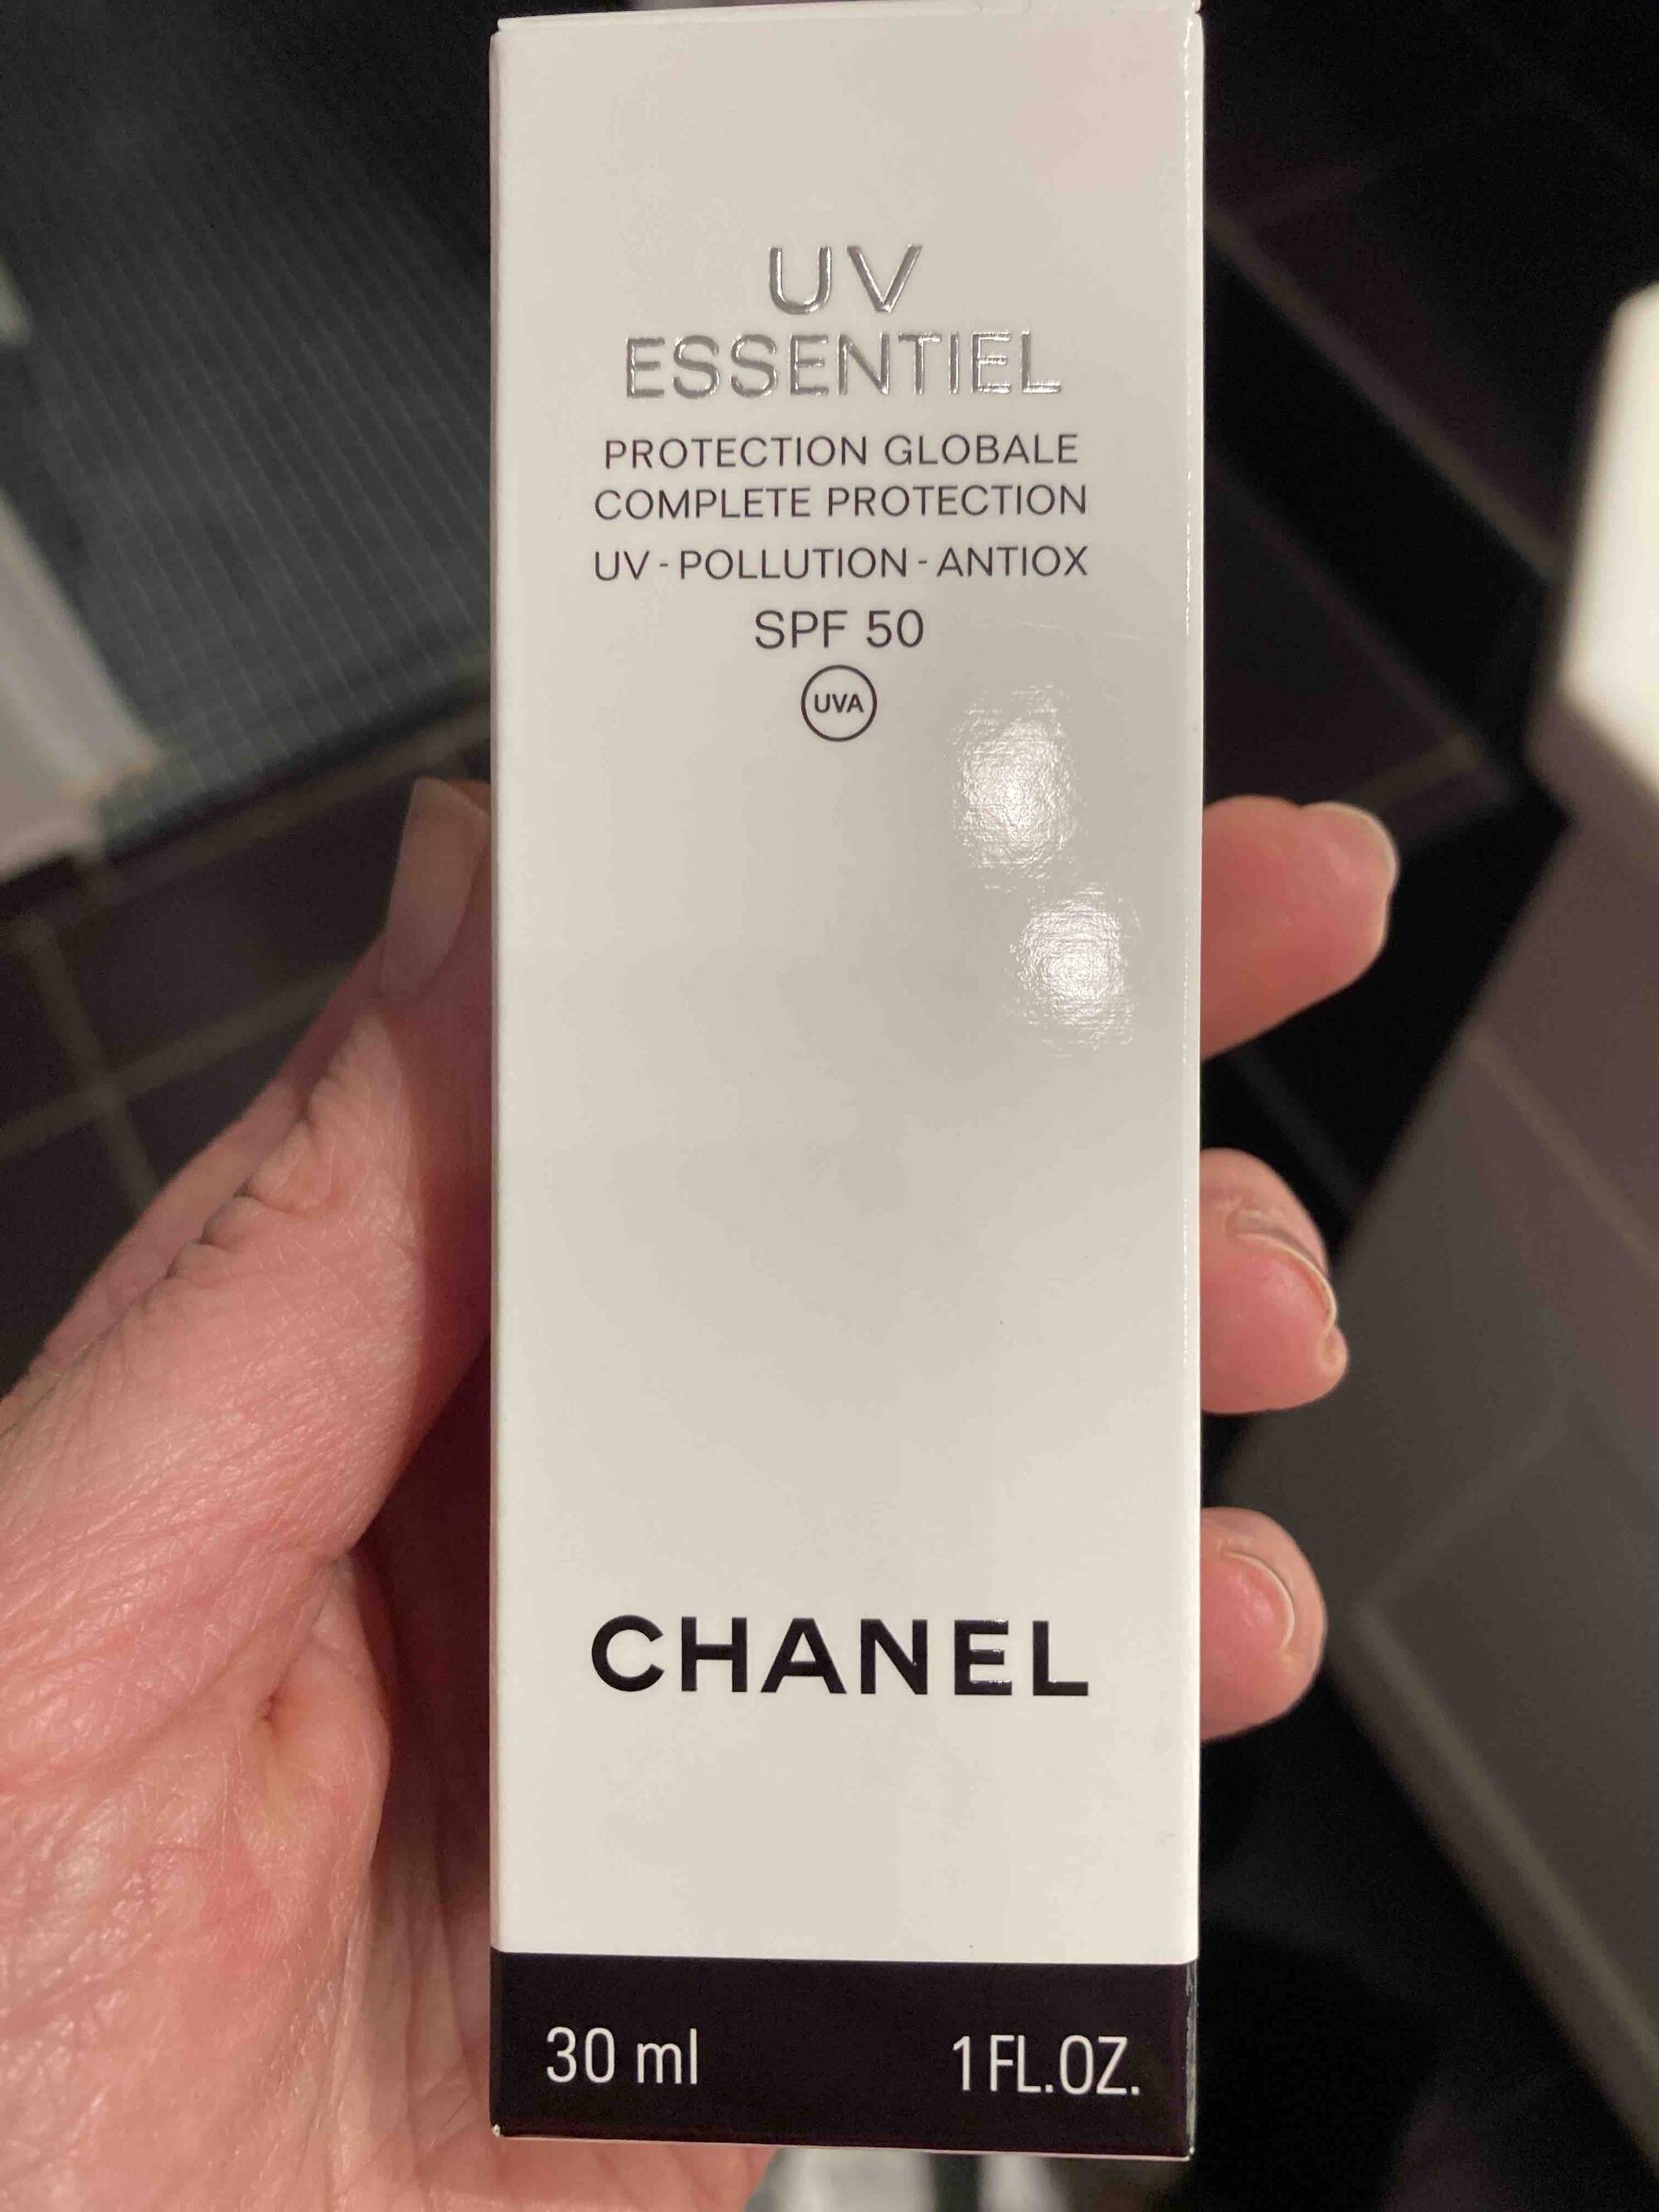 Chanel UV Essentiel Complete Sunscreen UV Protection Anti Pollution SF 50  Review